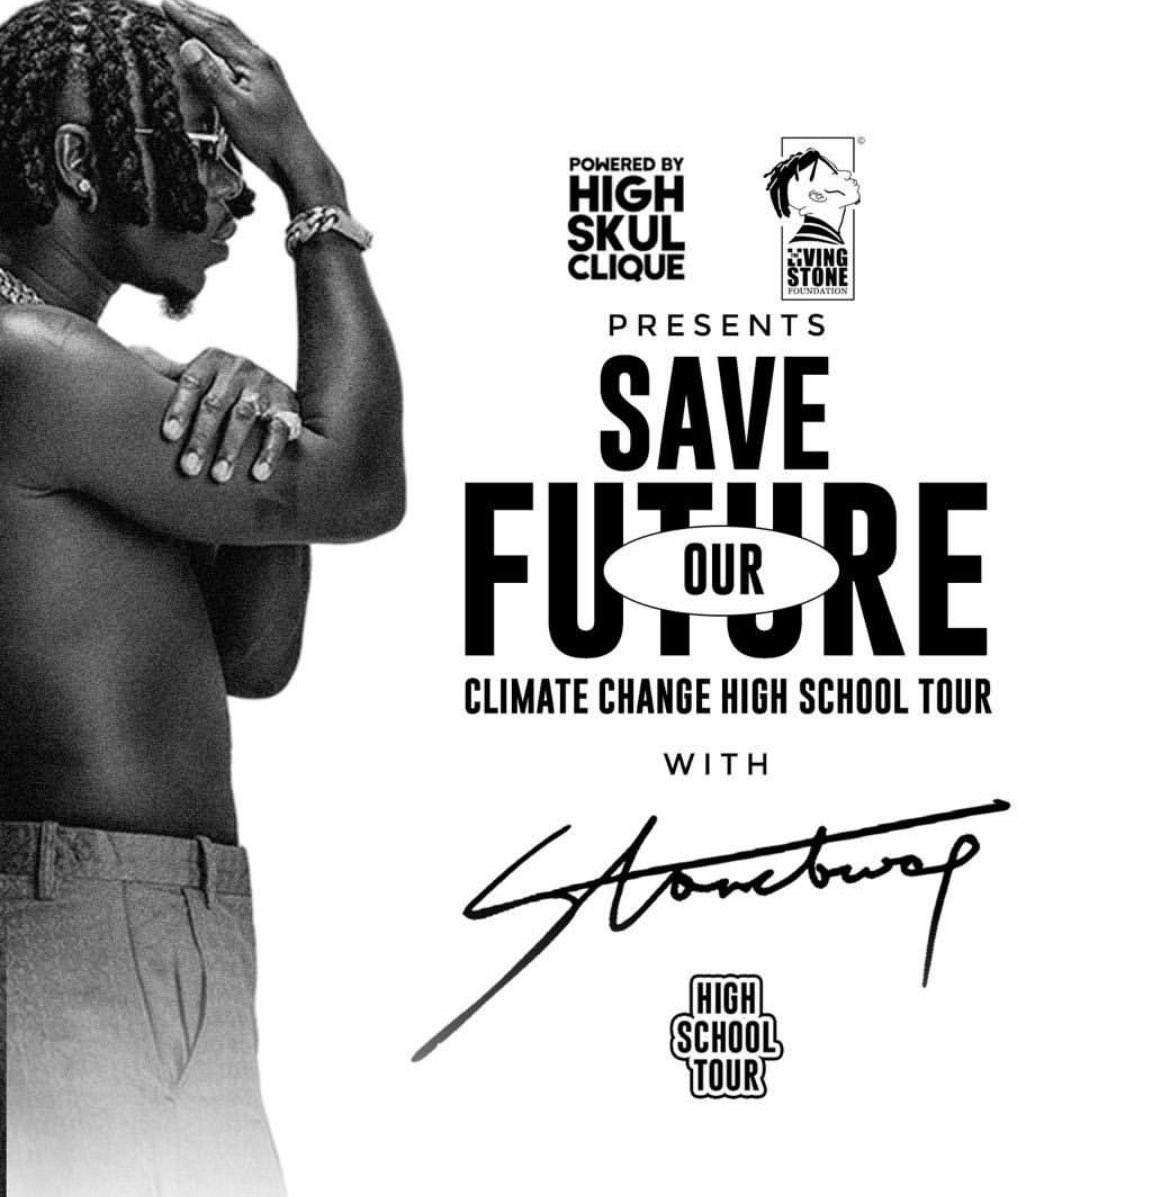 High Skul Clique, in collaboration with @stonebwoy, is embarking on a climate change high school tour themed 'Save Our Future’